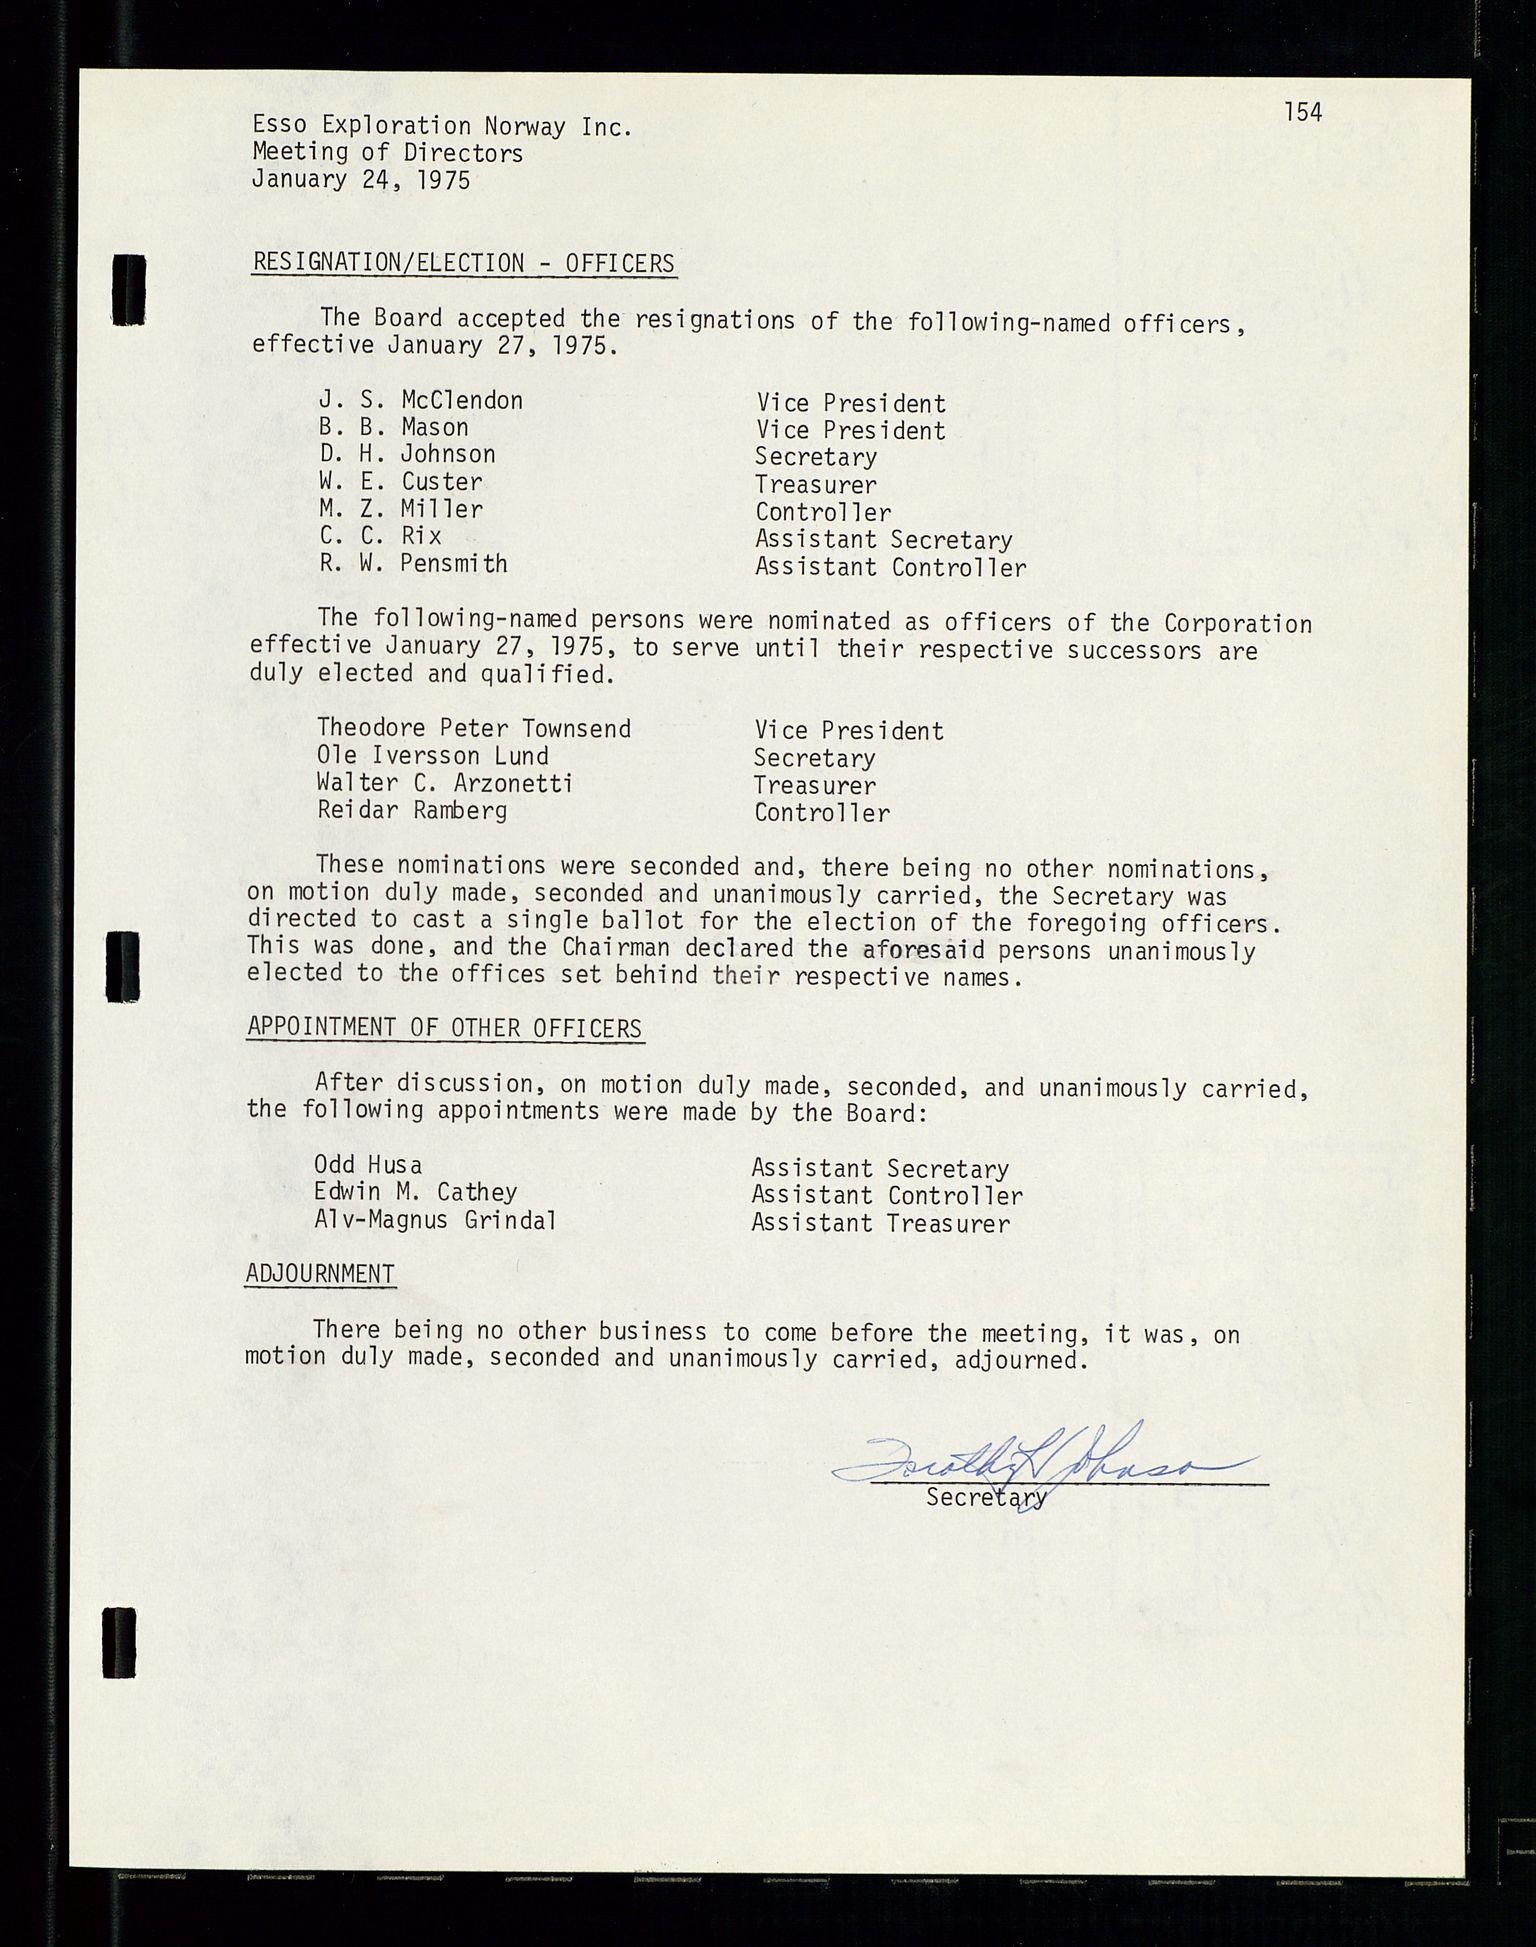 Pa 1512 - Esso Exploration and Production Norway Inc., SAST/A-101917/A/Aa/L0001/0001: Styredokumenter / Corporate records, By-Laws, Board meeting minutes, Incorporations, 1965-1975, s. 154